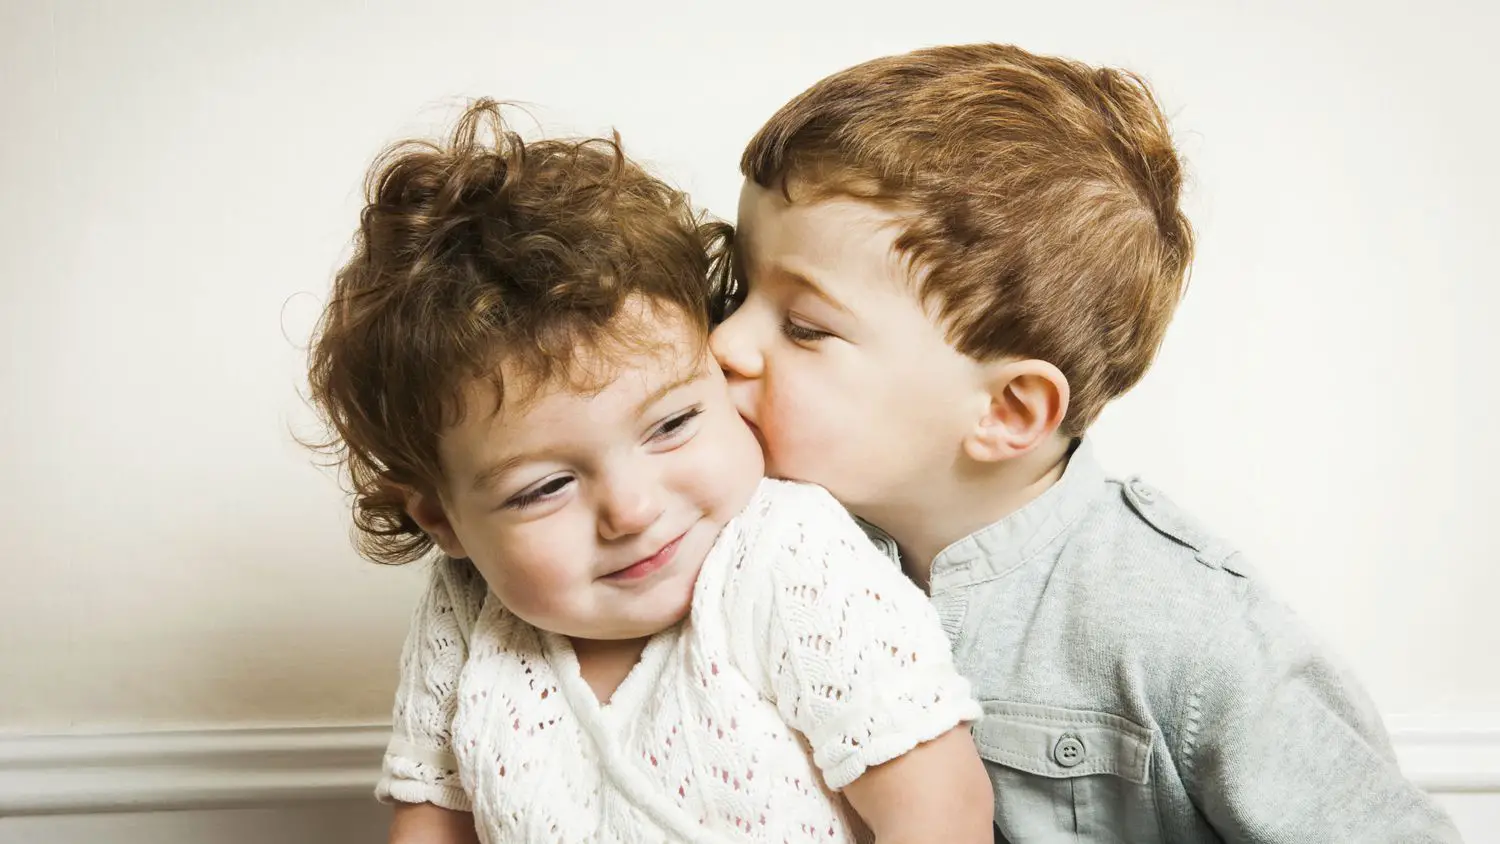 physical affection between siblings brother kissing his sister on cheek